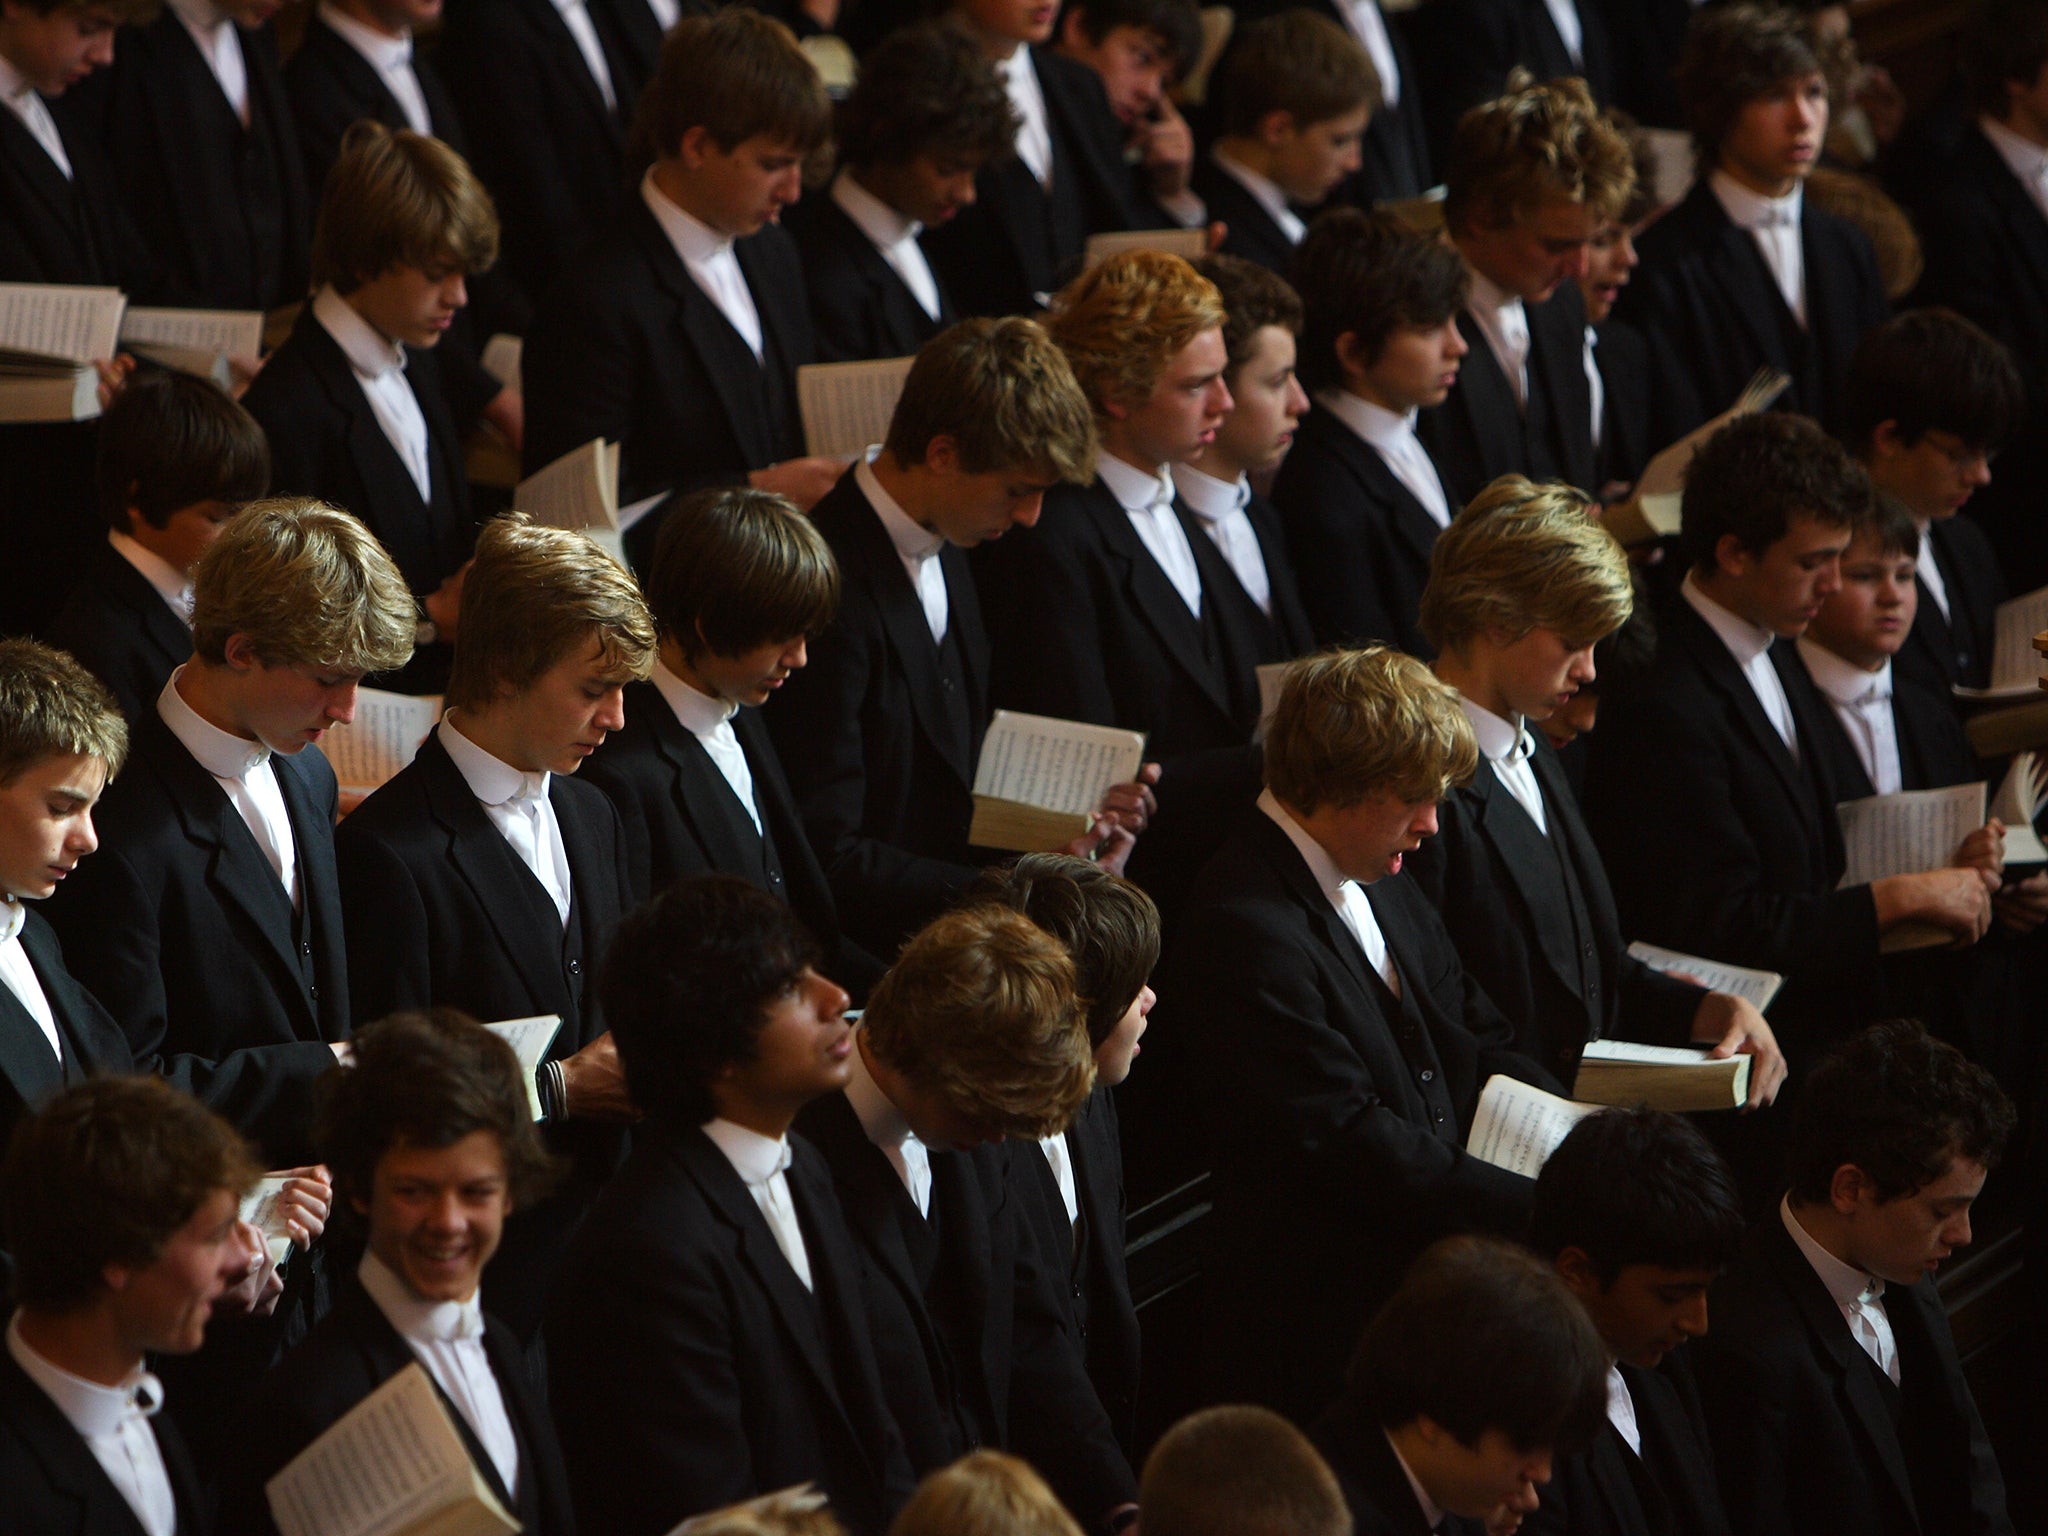 Pupils attending a chapel service at Eton College